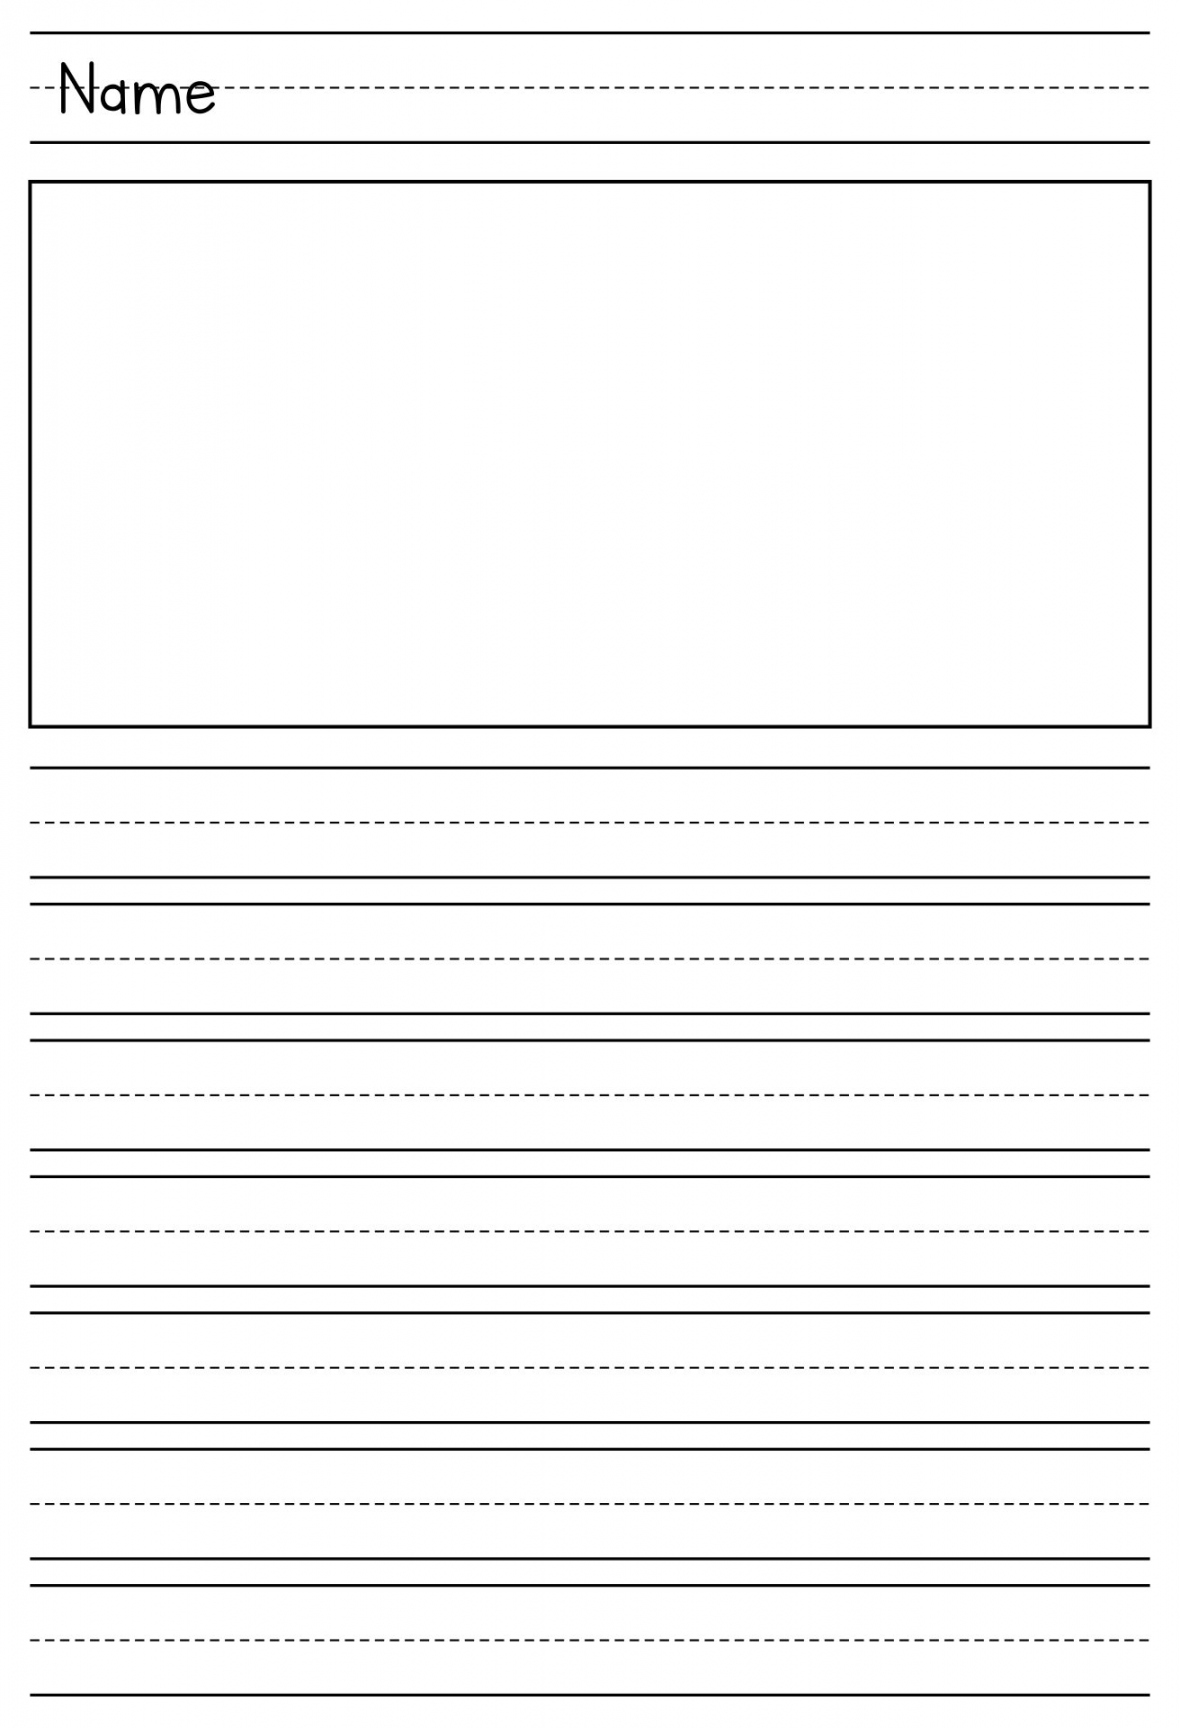 Best Printable Primary Writing Paper Template - printablee - Primary Lined Paper Printable